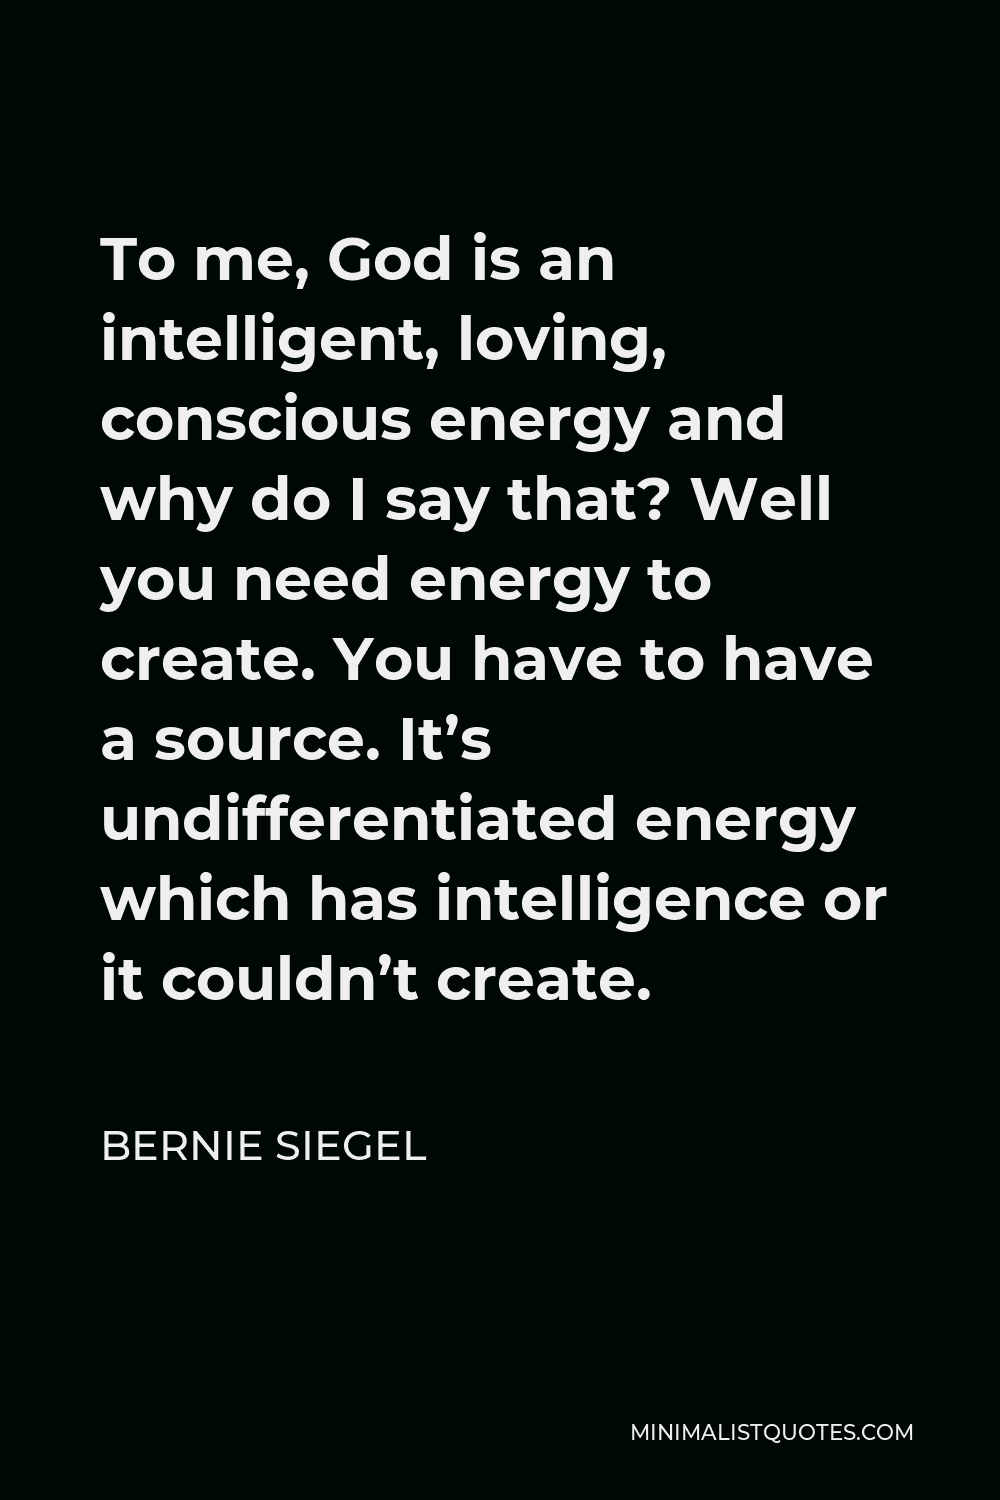 Bernie Siegel Quote - To me, God is an intelligent, loving, conscious energy and why do I say that? Well you need energy to create. You have to have a source. It’s undifferentiated energy which has intelligence or it couldn’t create.